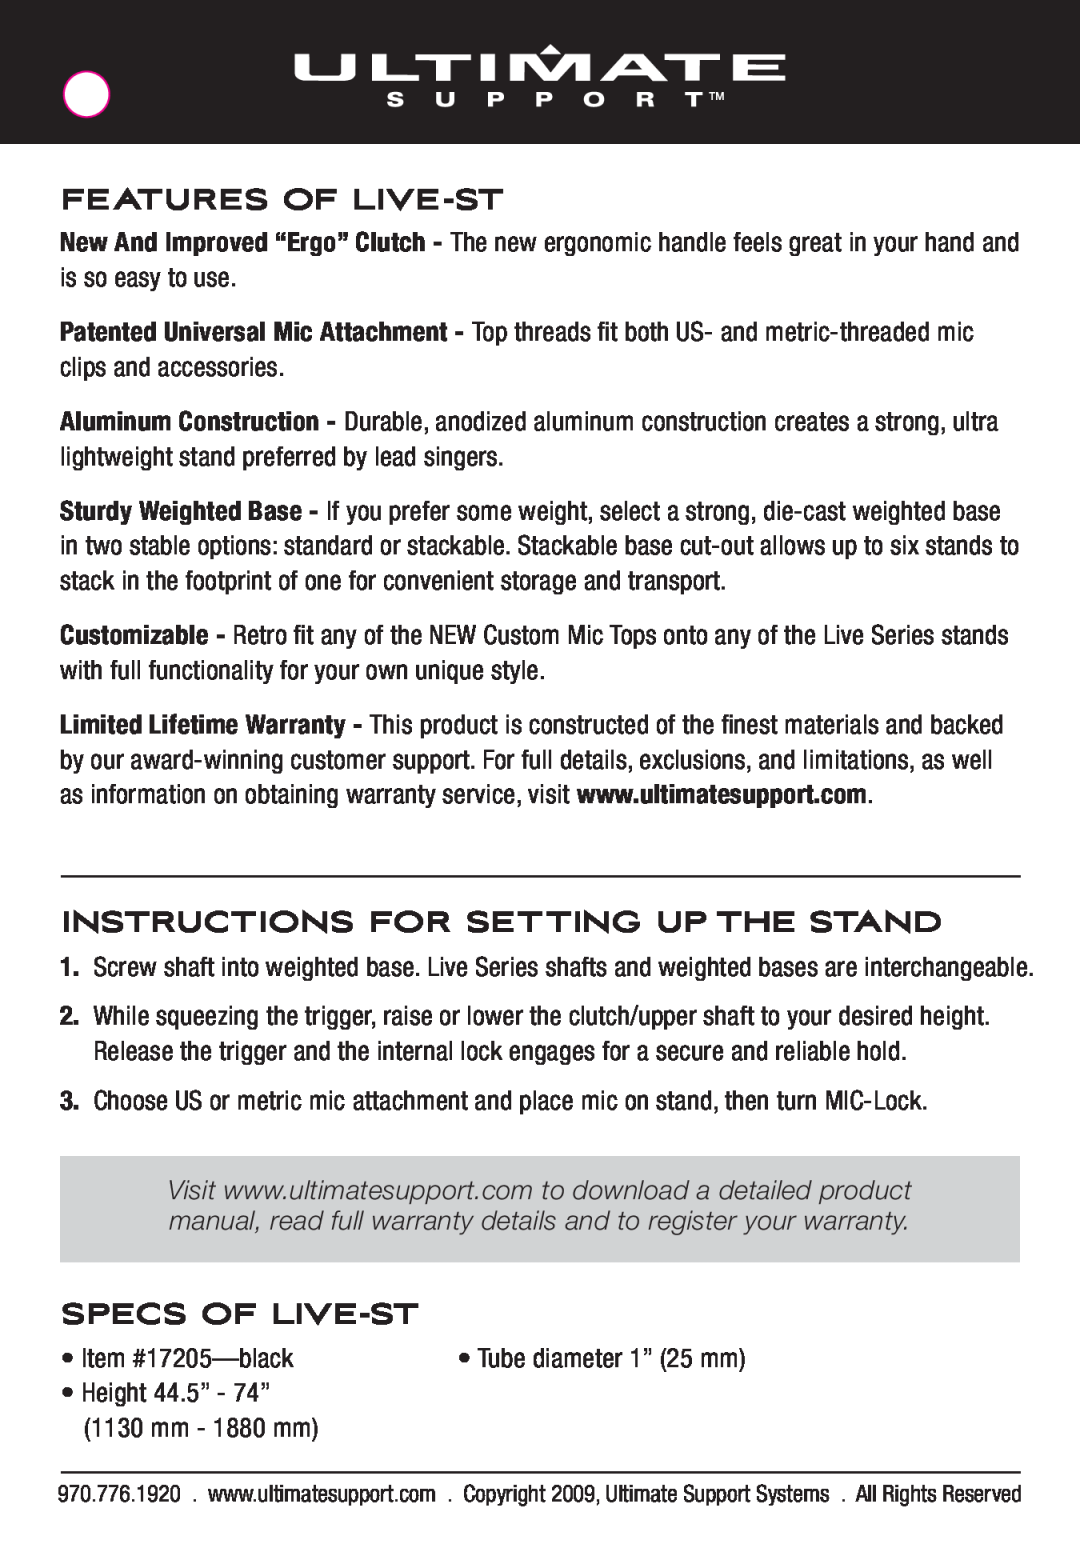 Ultimate Support Systems 17205T manual Features Of Live-St, Instructions For Setting Up The Stand, Specs Of Live-St 